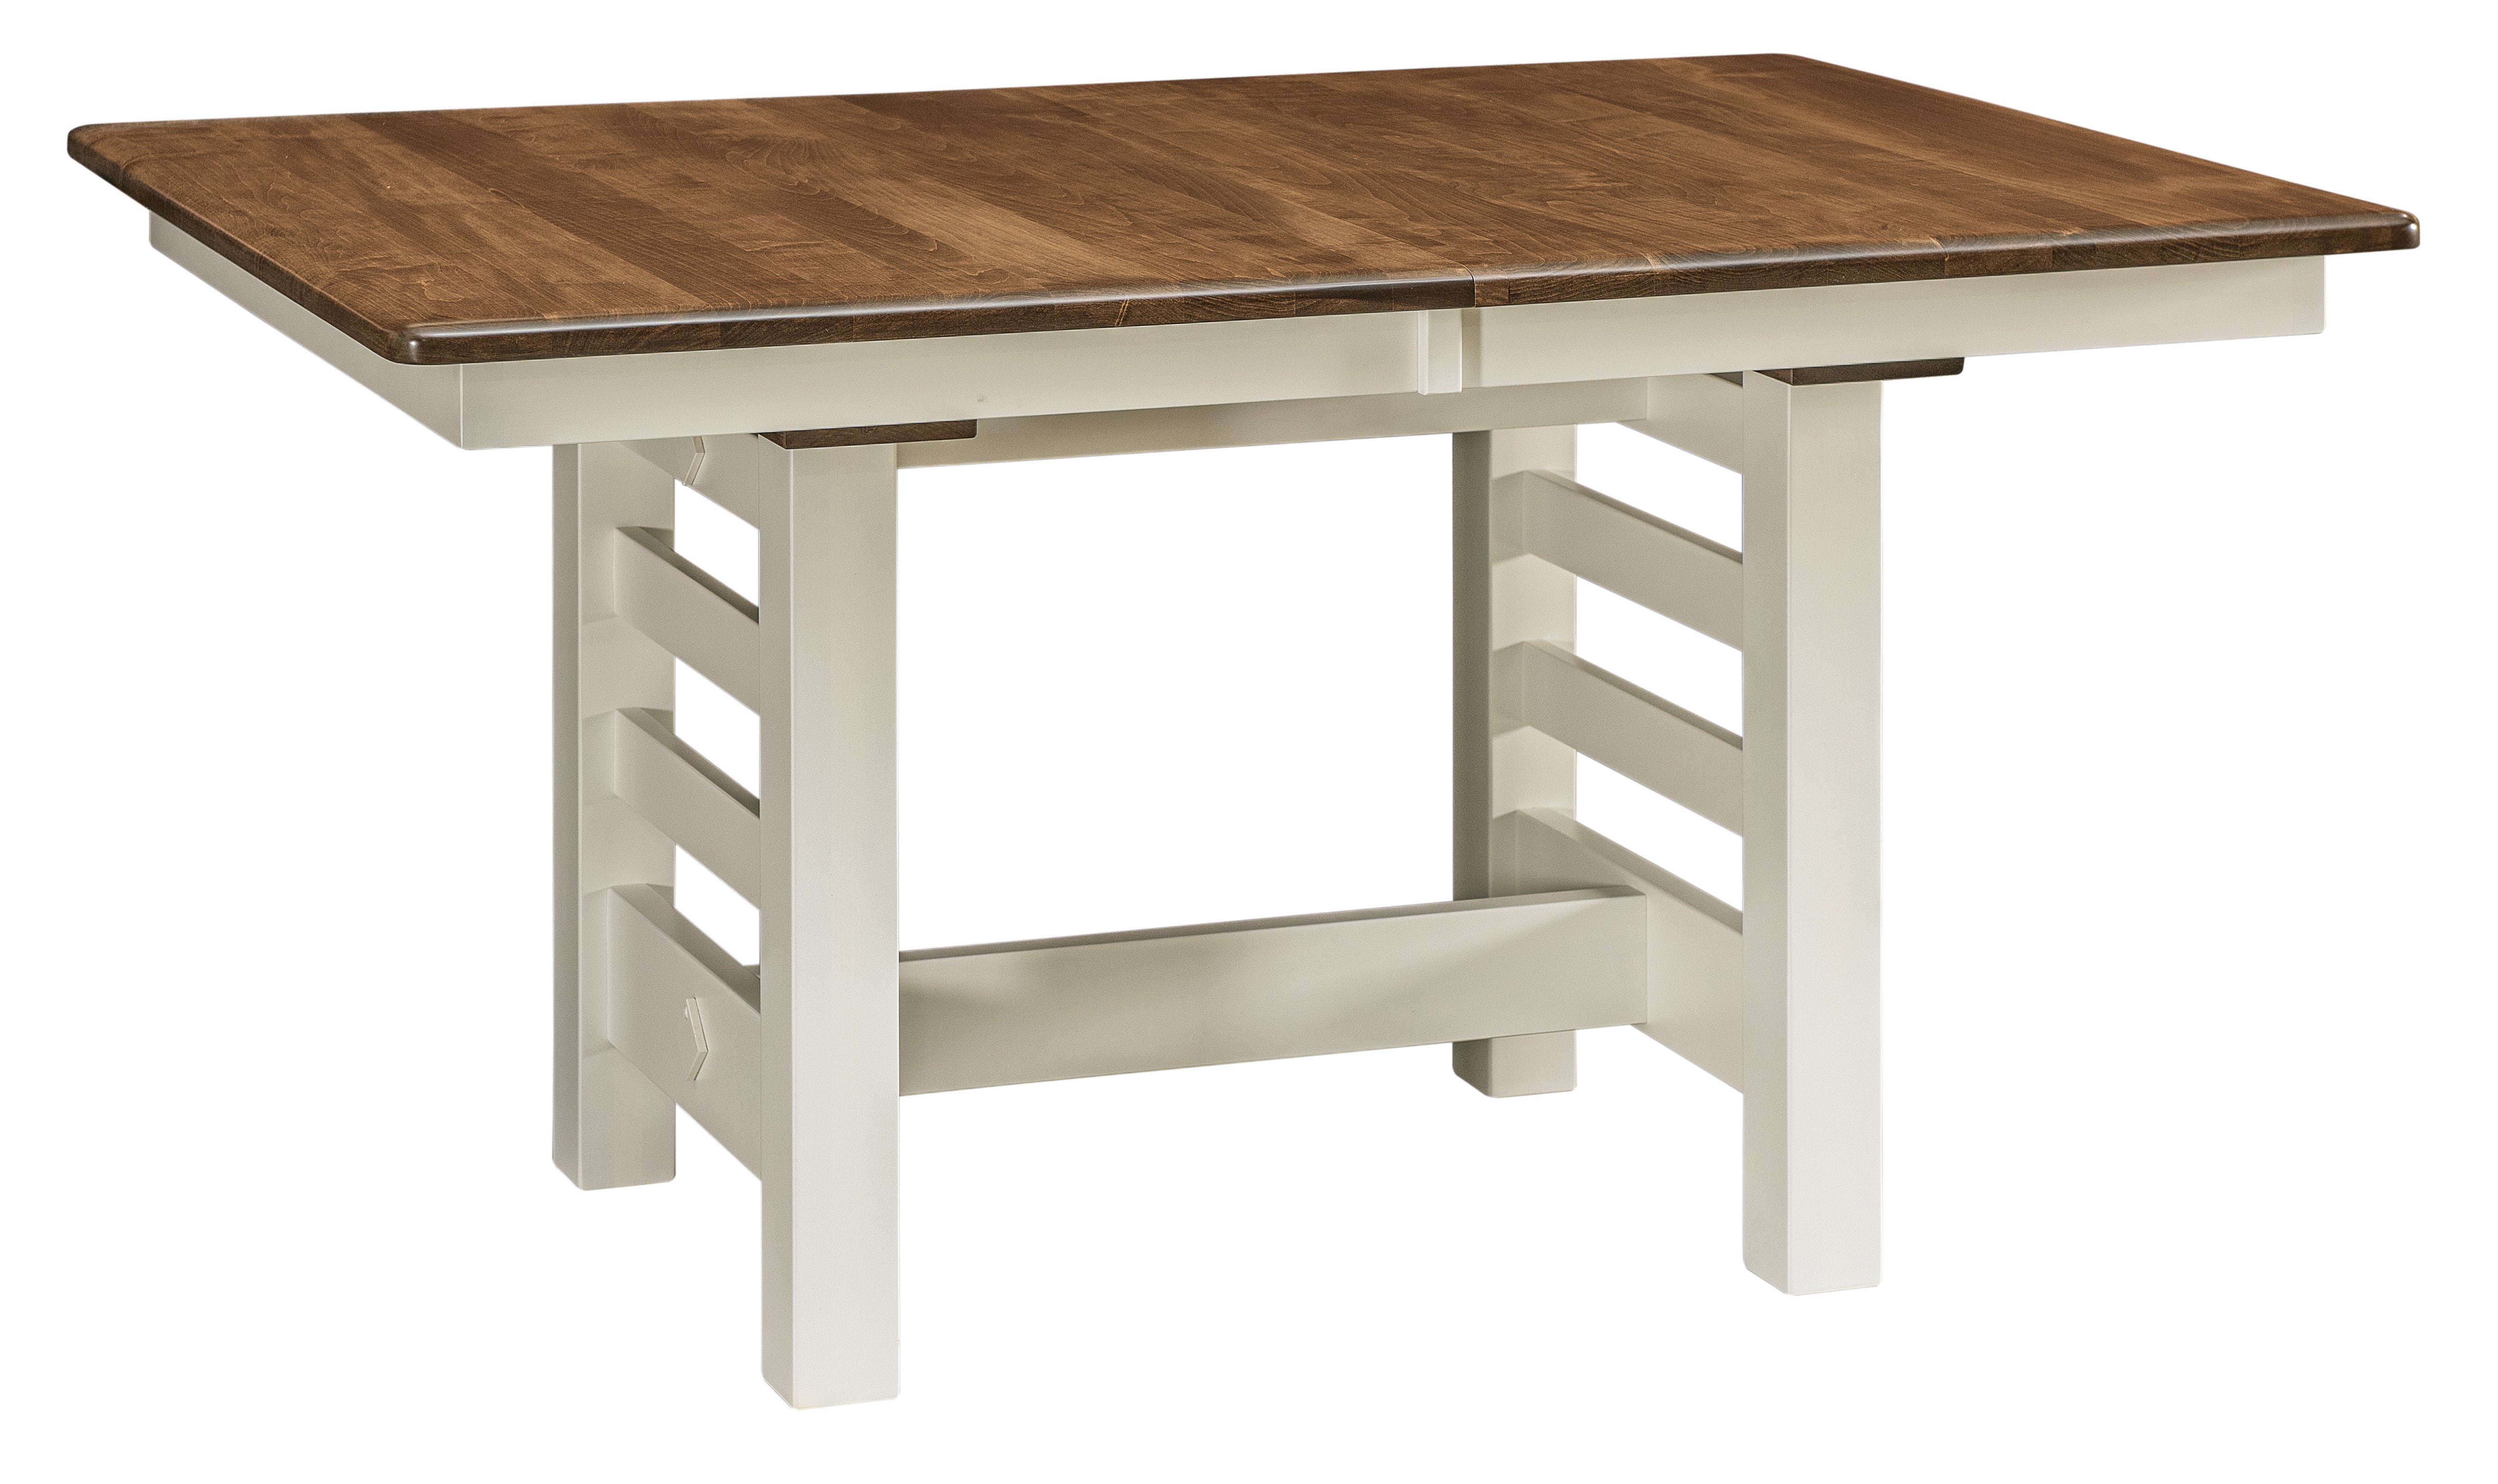 braden trestle table shown in brown maple with almond stain top and muted white 10 sheen base